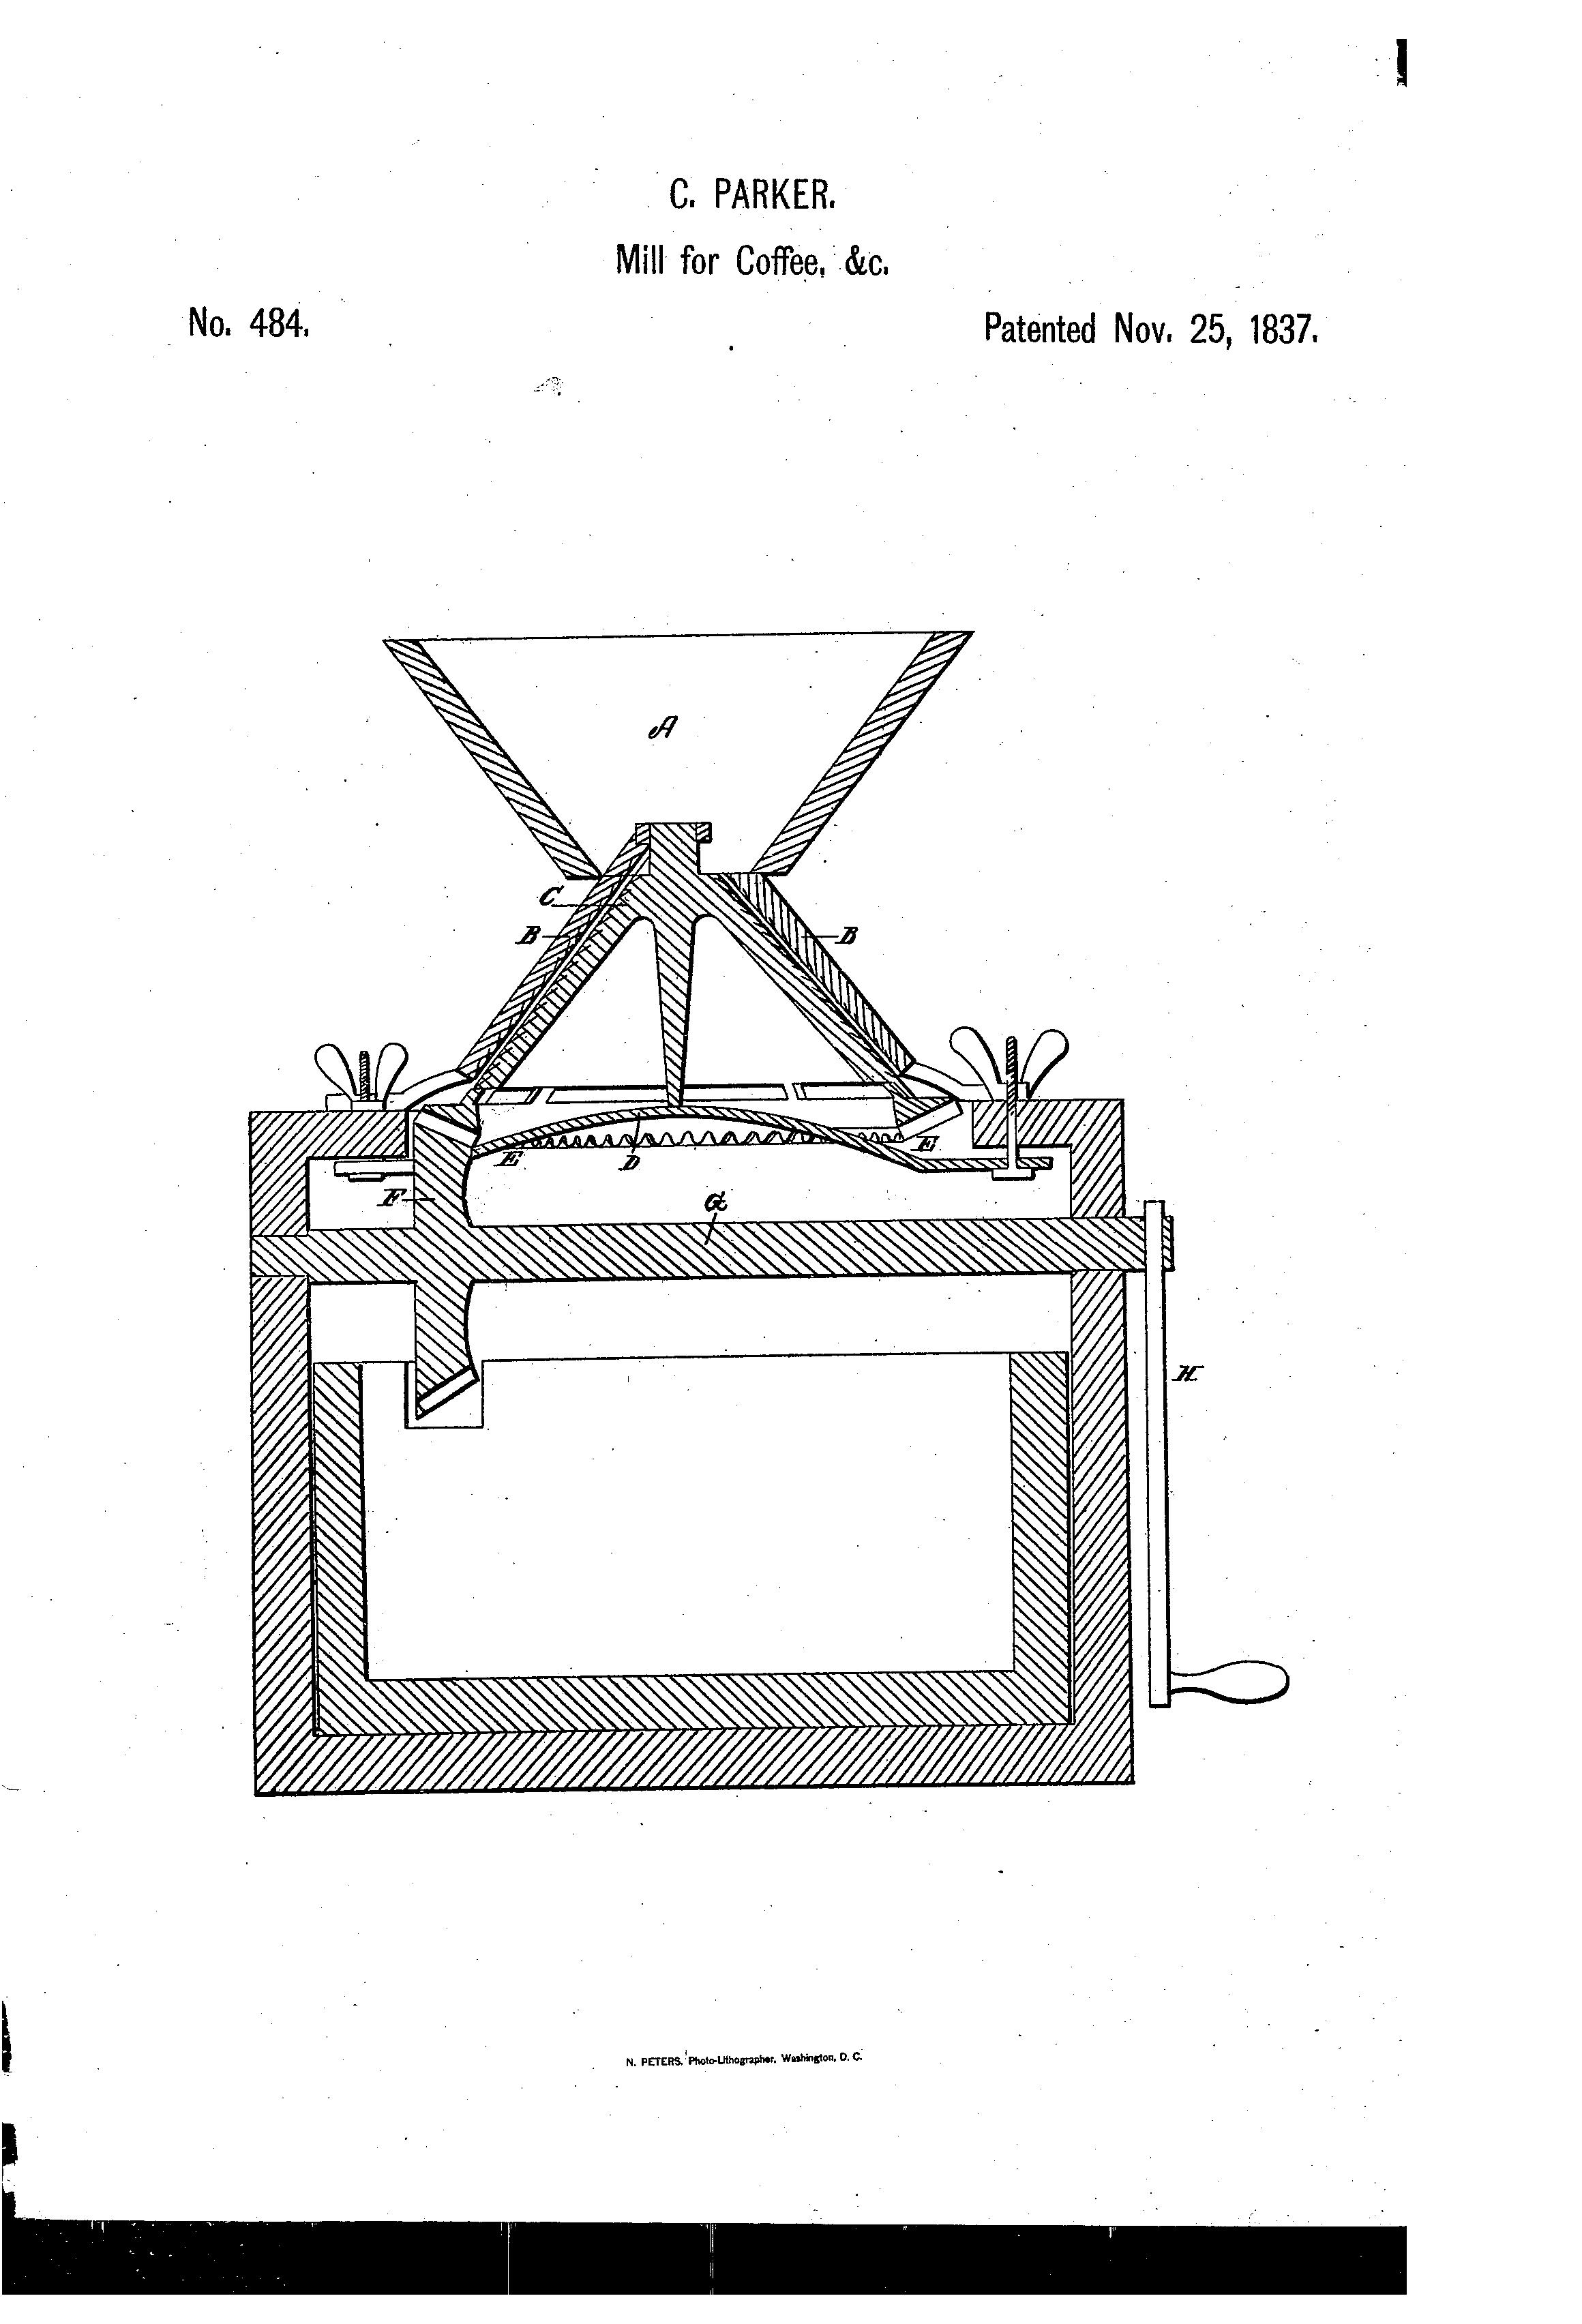 MILL FOR GRINDING BARK, CORN, &c. - United States Patent 484 